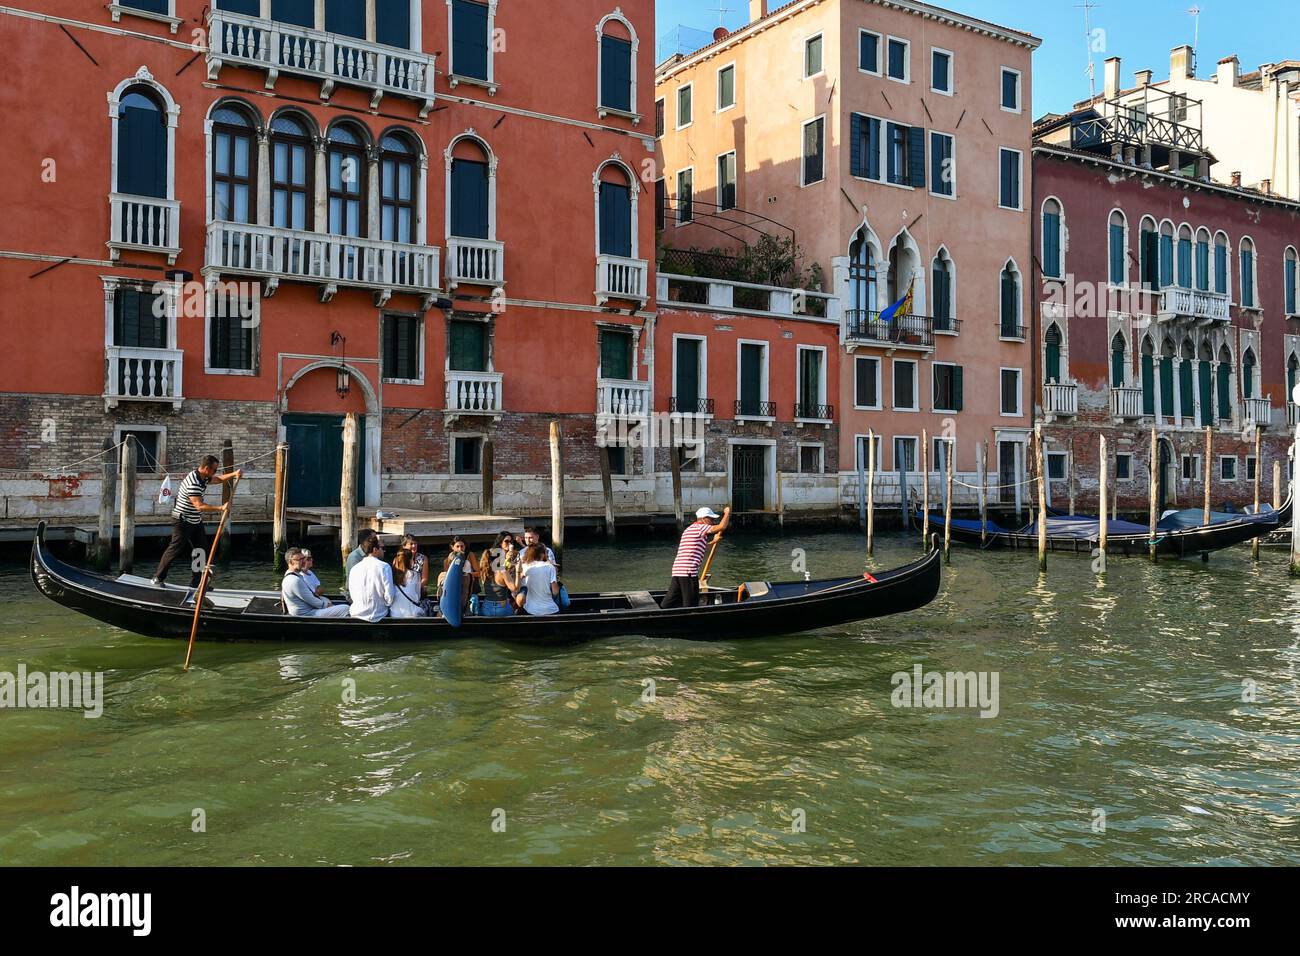 A group of tourists crossing the Grand Canal on a ferry gondola in front of Palazzo Giustinian Persico and Palazzo Tiepolo Passi, Venice, Italy Stock Photo